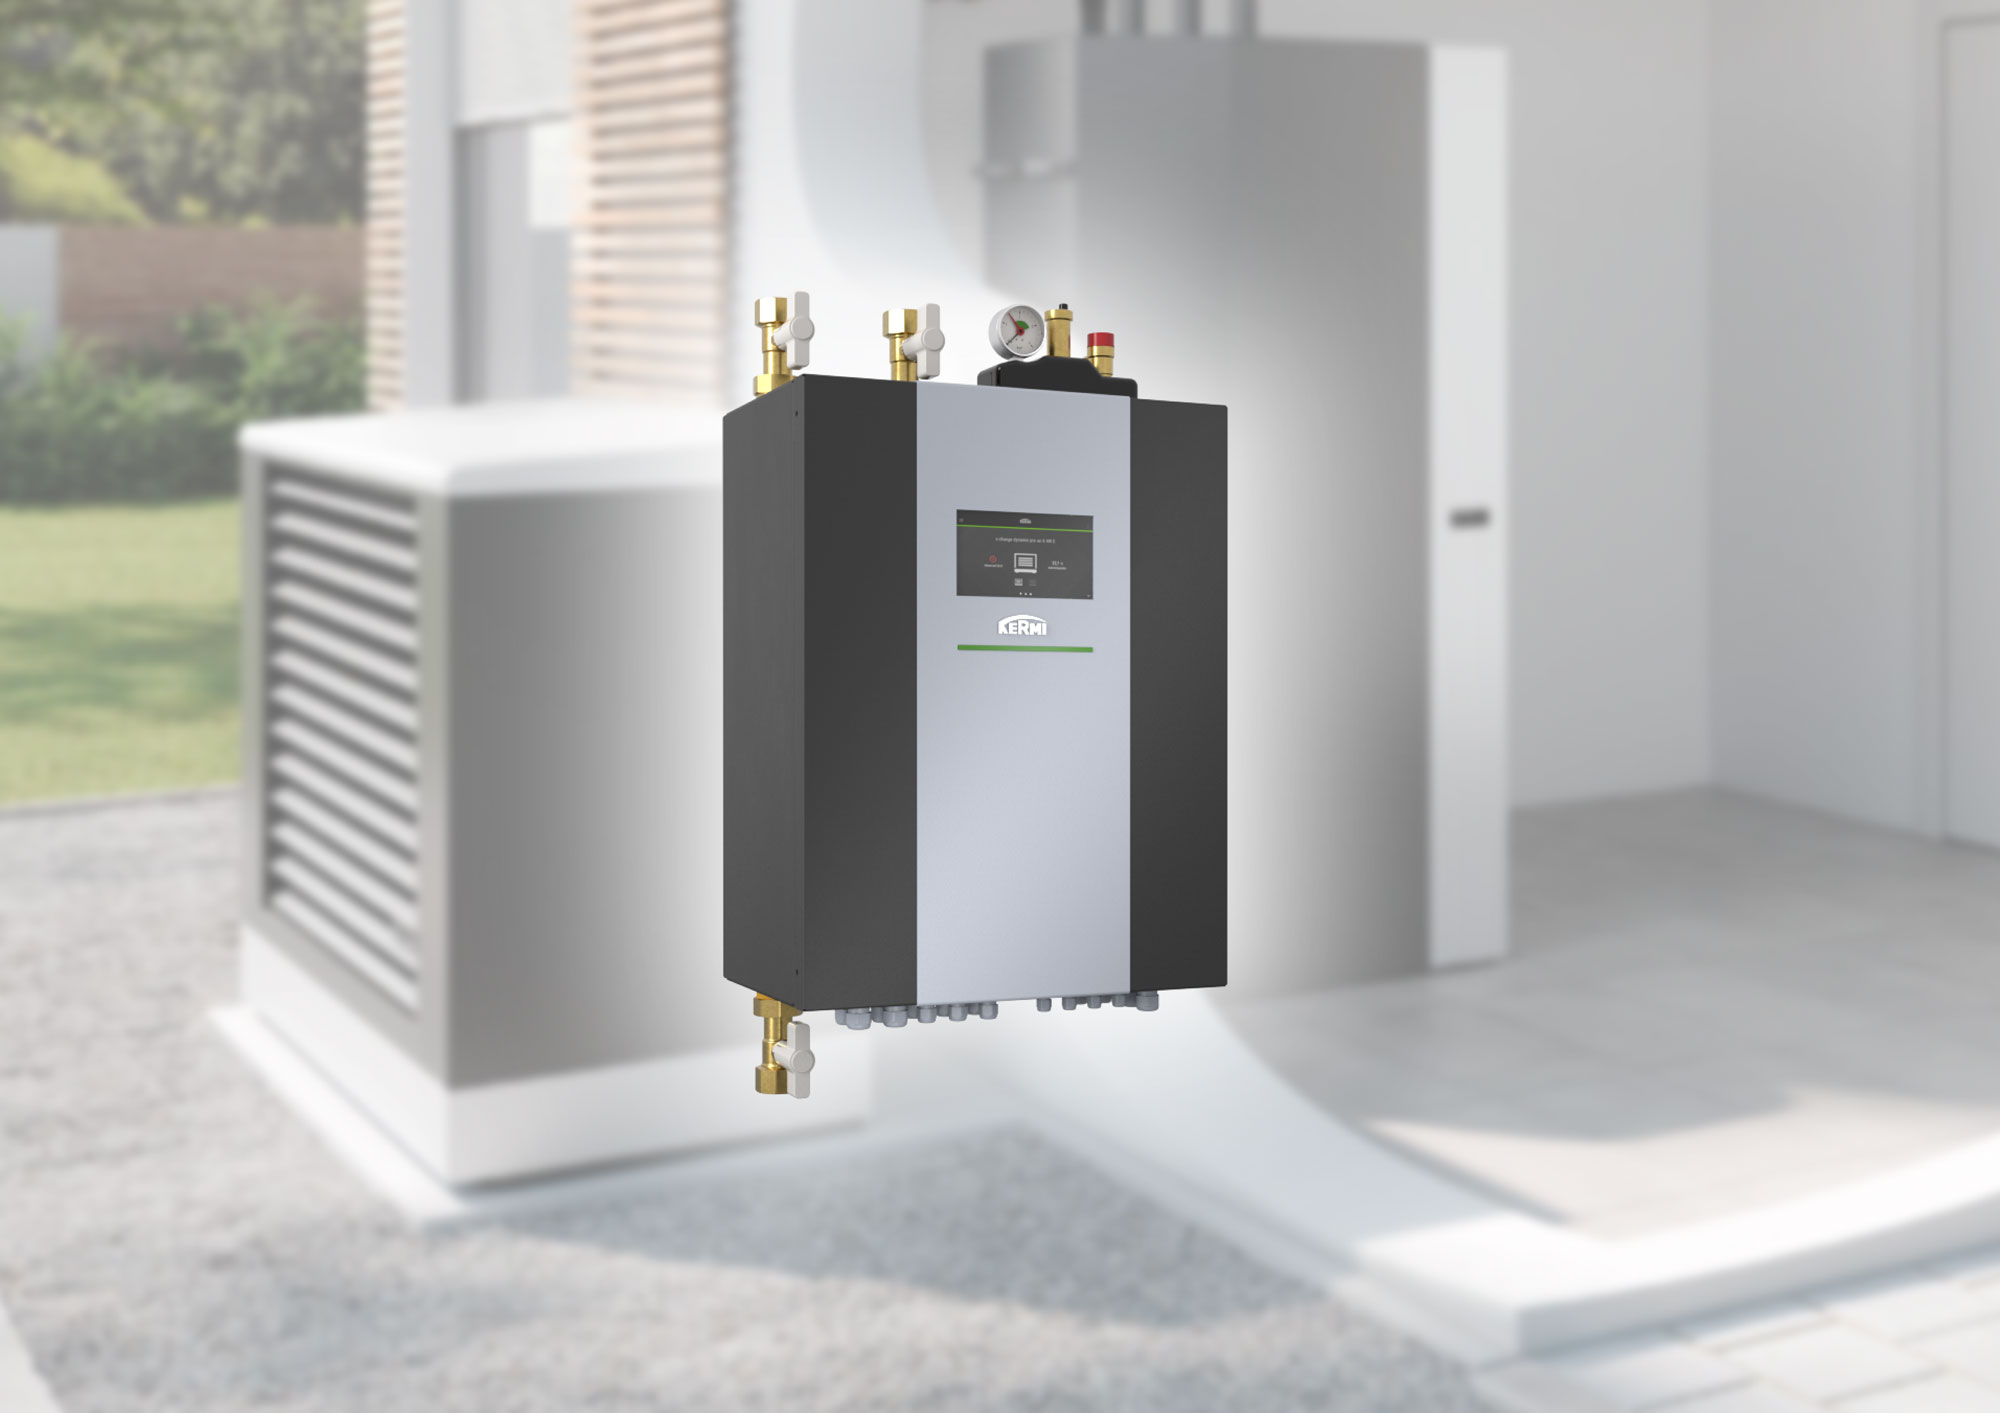 The Hydrobox pro is the central control unit for the provision and distribution of heat energy in the heating system.